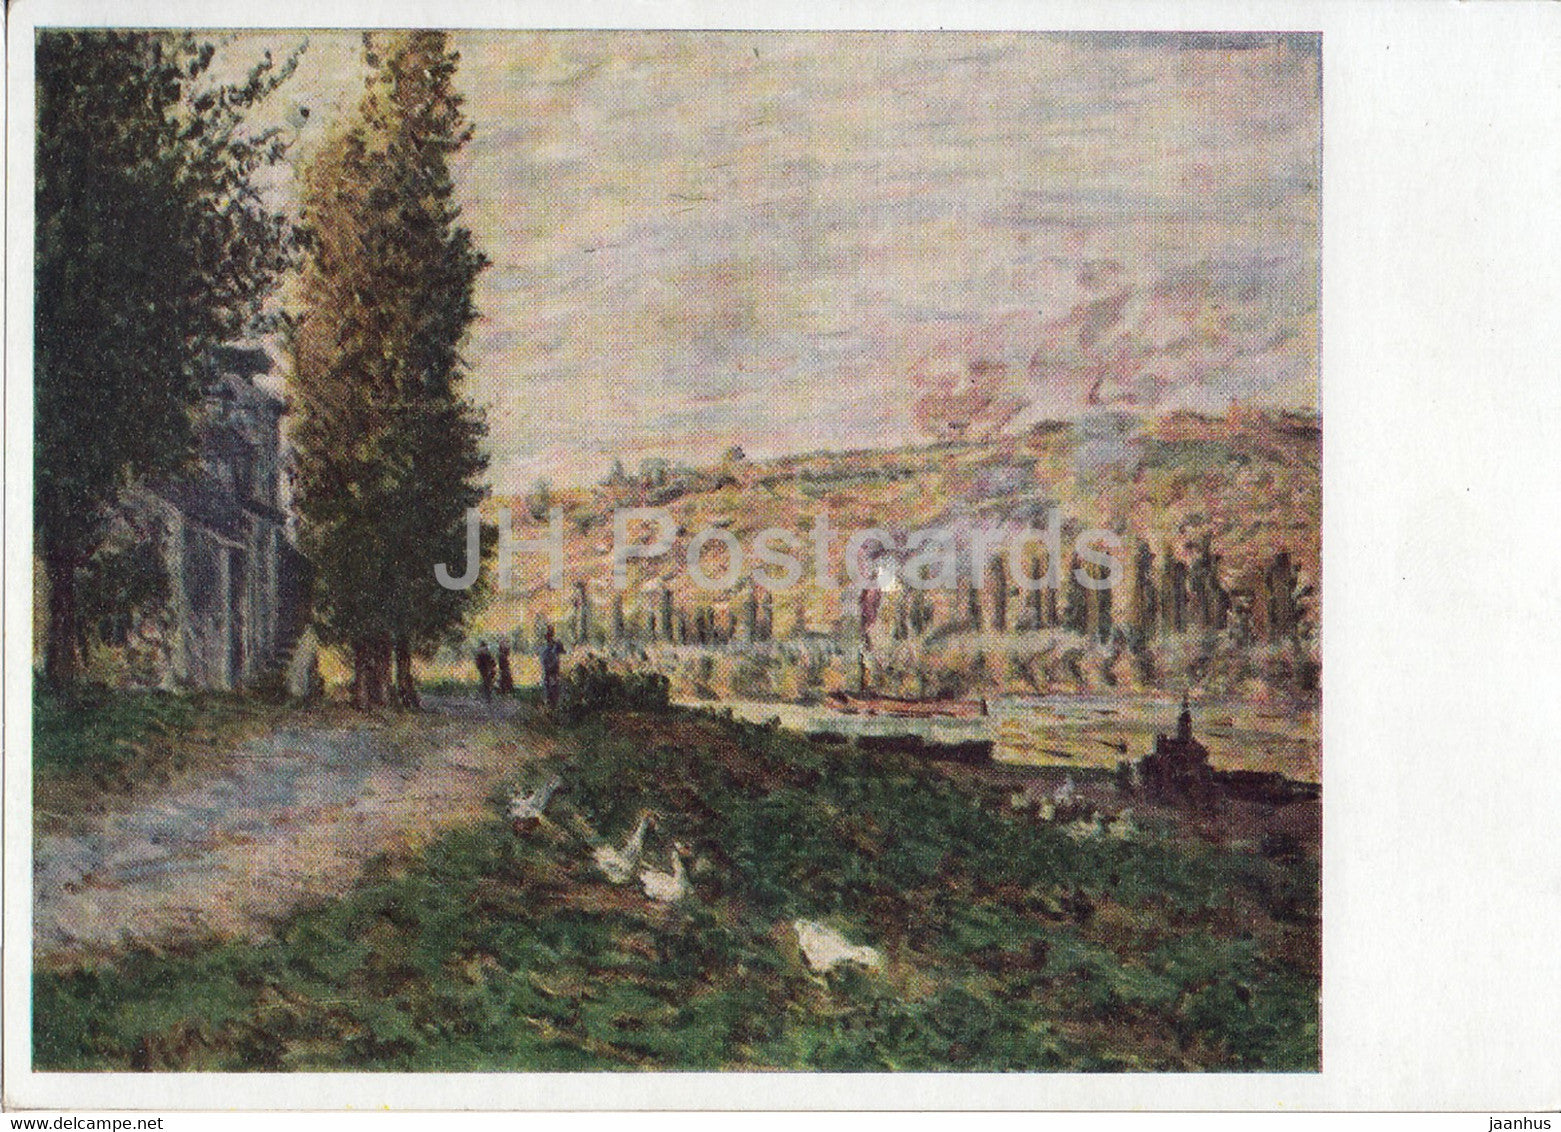 painting by Claude Monet - Selneboschung bei Lavacourt - Seine - French art - Germany DDR - unused - JH Postcards